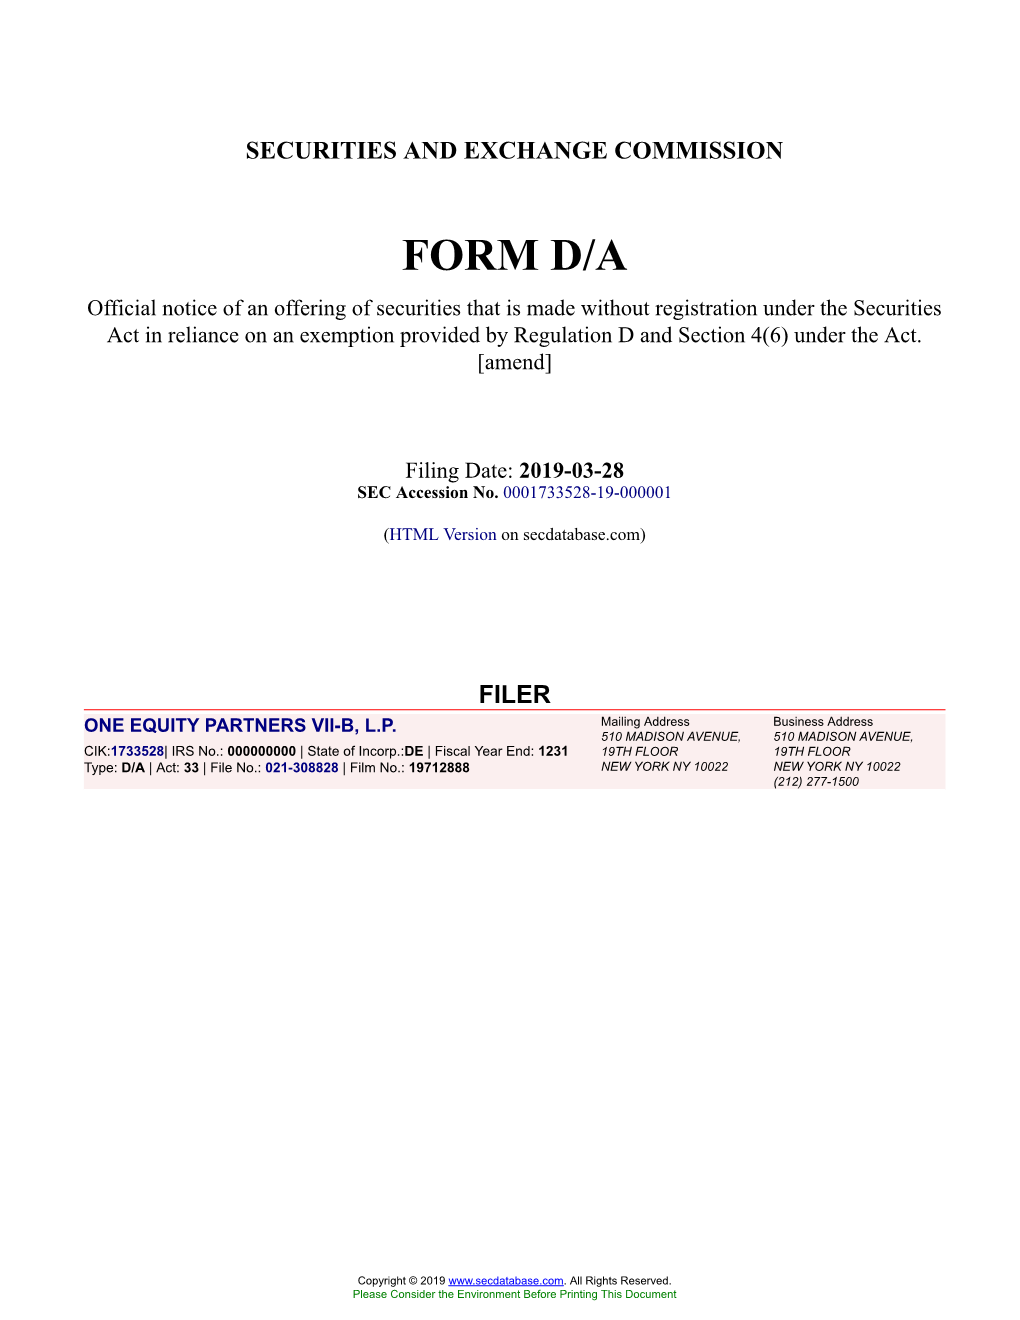 ONE EQUITY PARTNERS VII-B, L.P. Form D/A Filed 2019-03-28